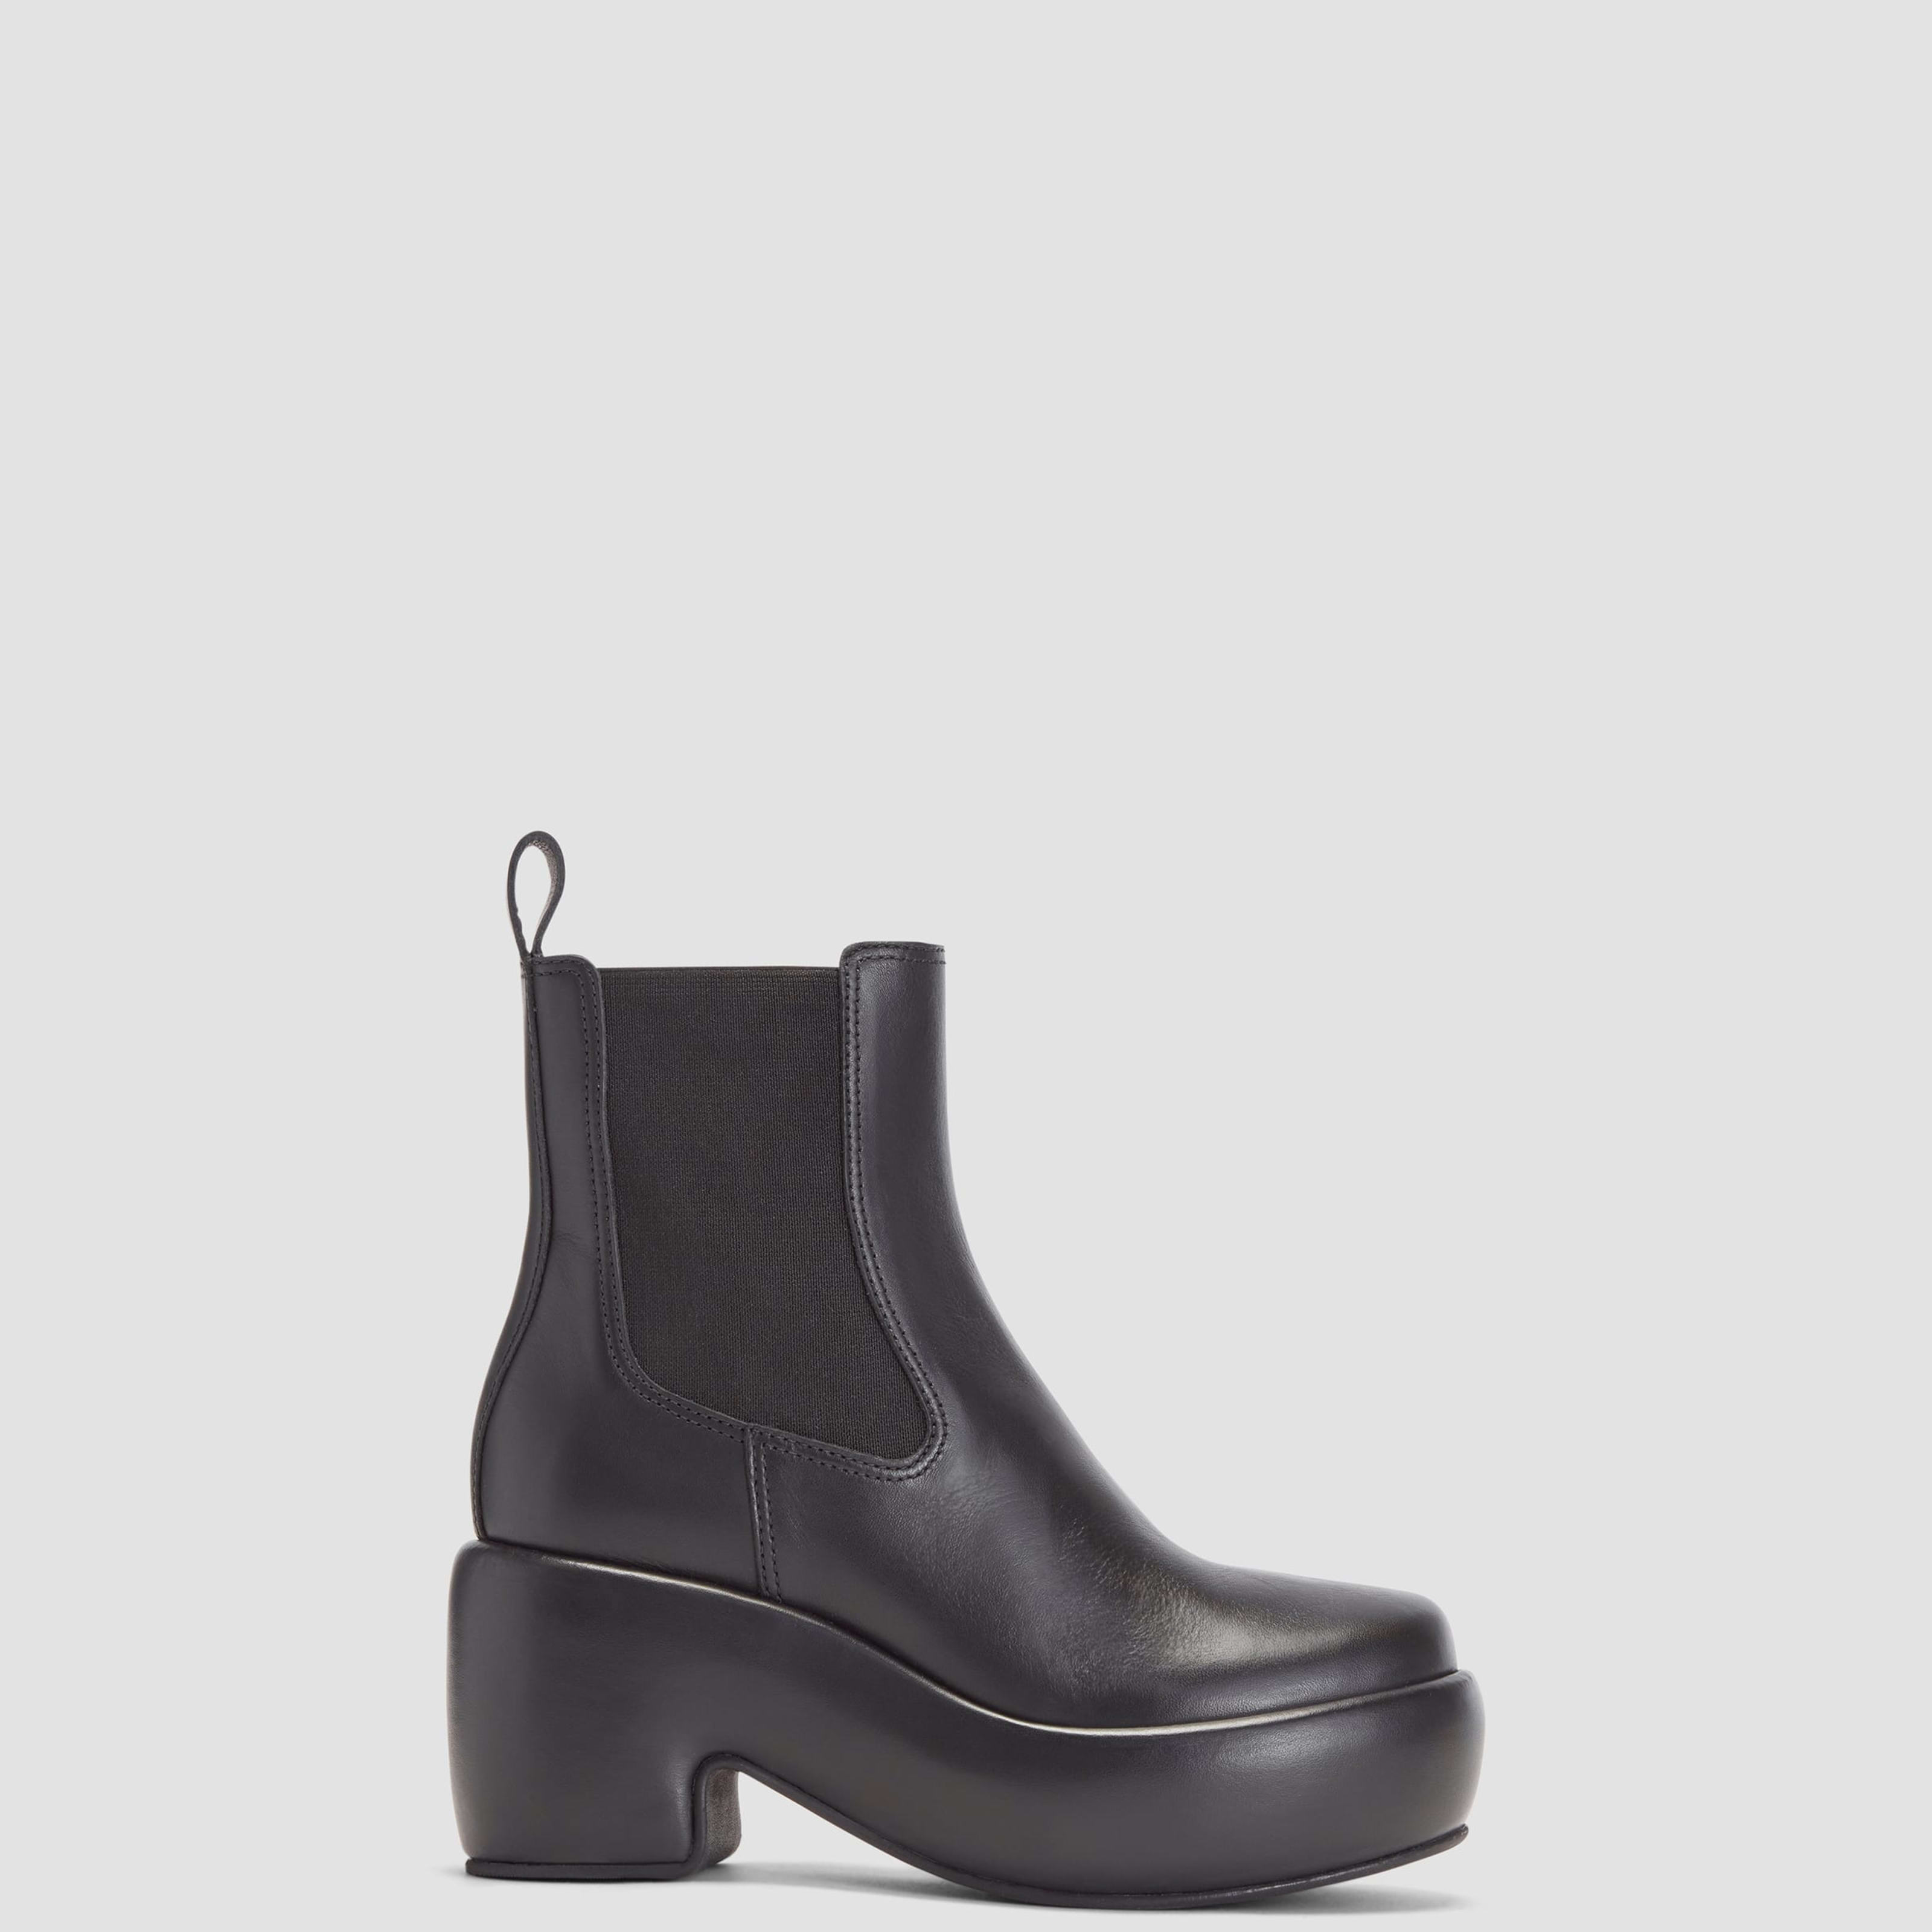 puffa boot by everlane in black, size 6